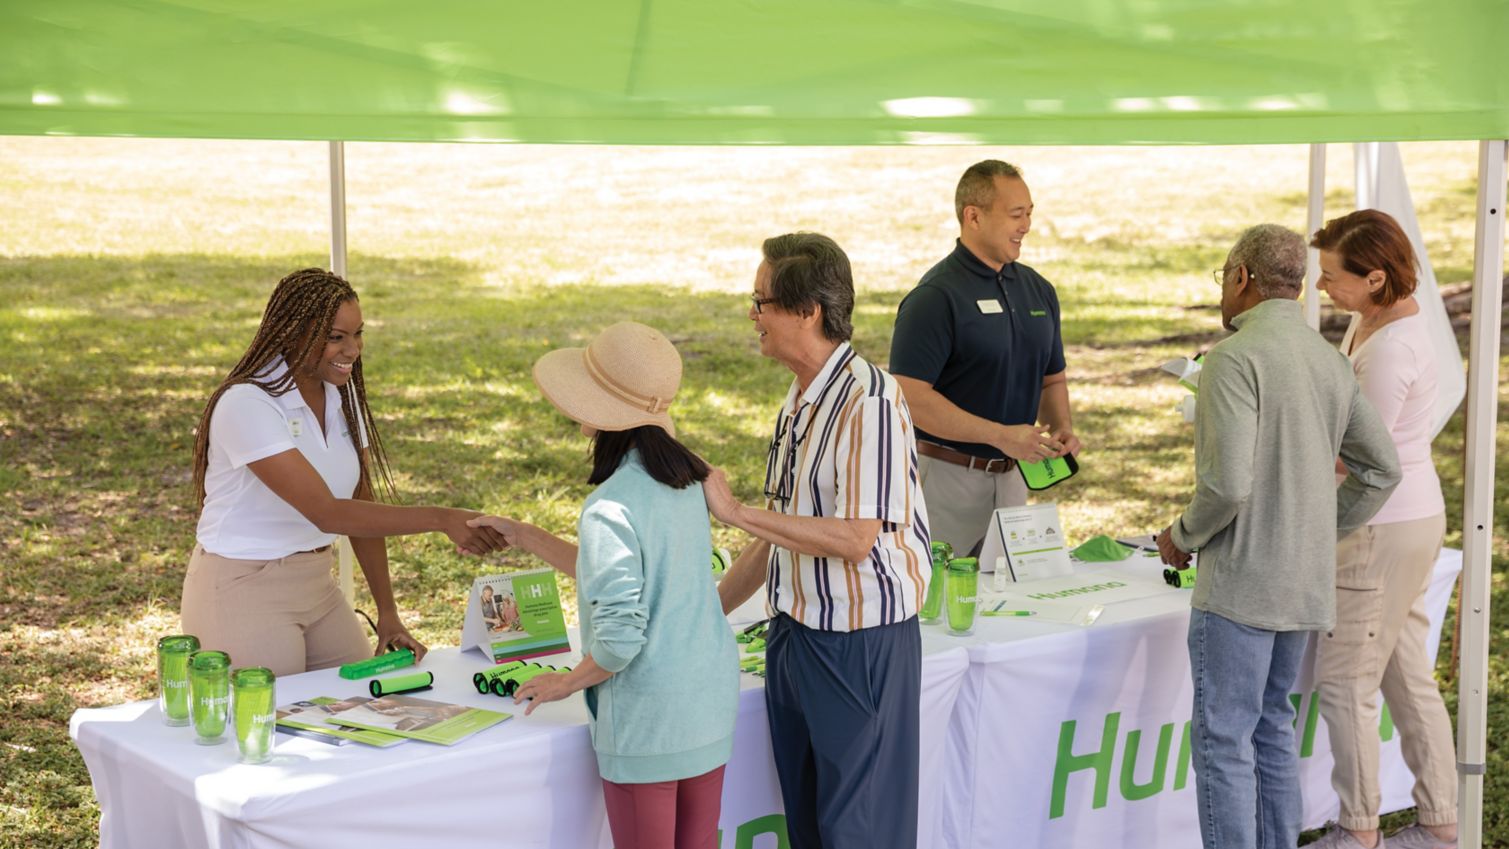 Two couples meet with Humana representatives at an outdoor event.